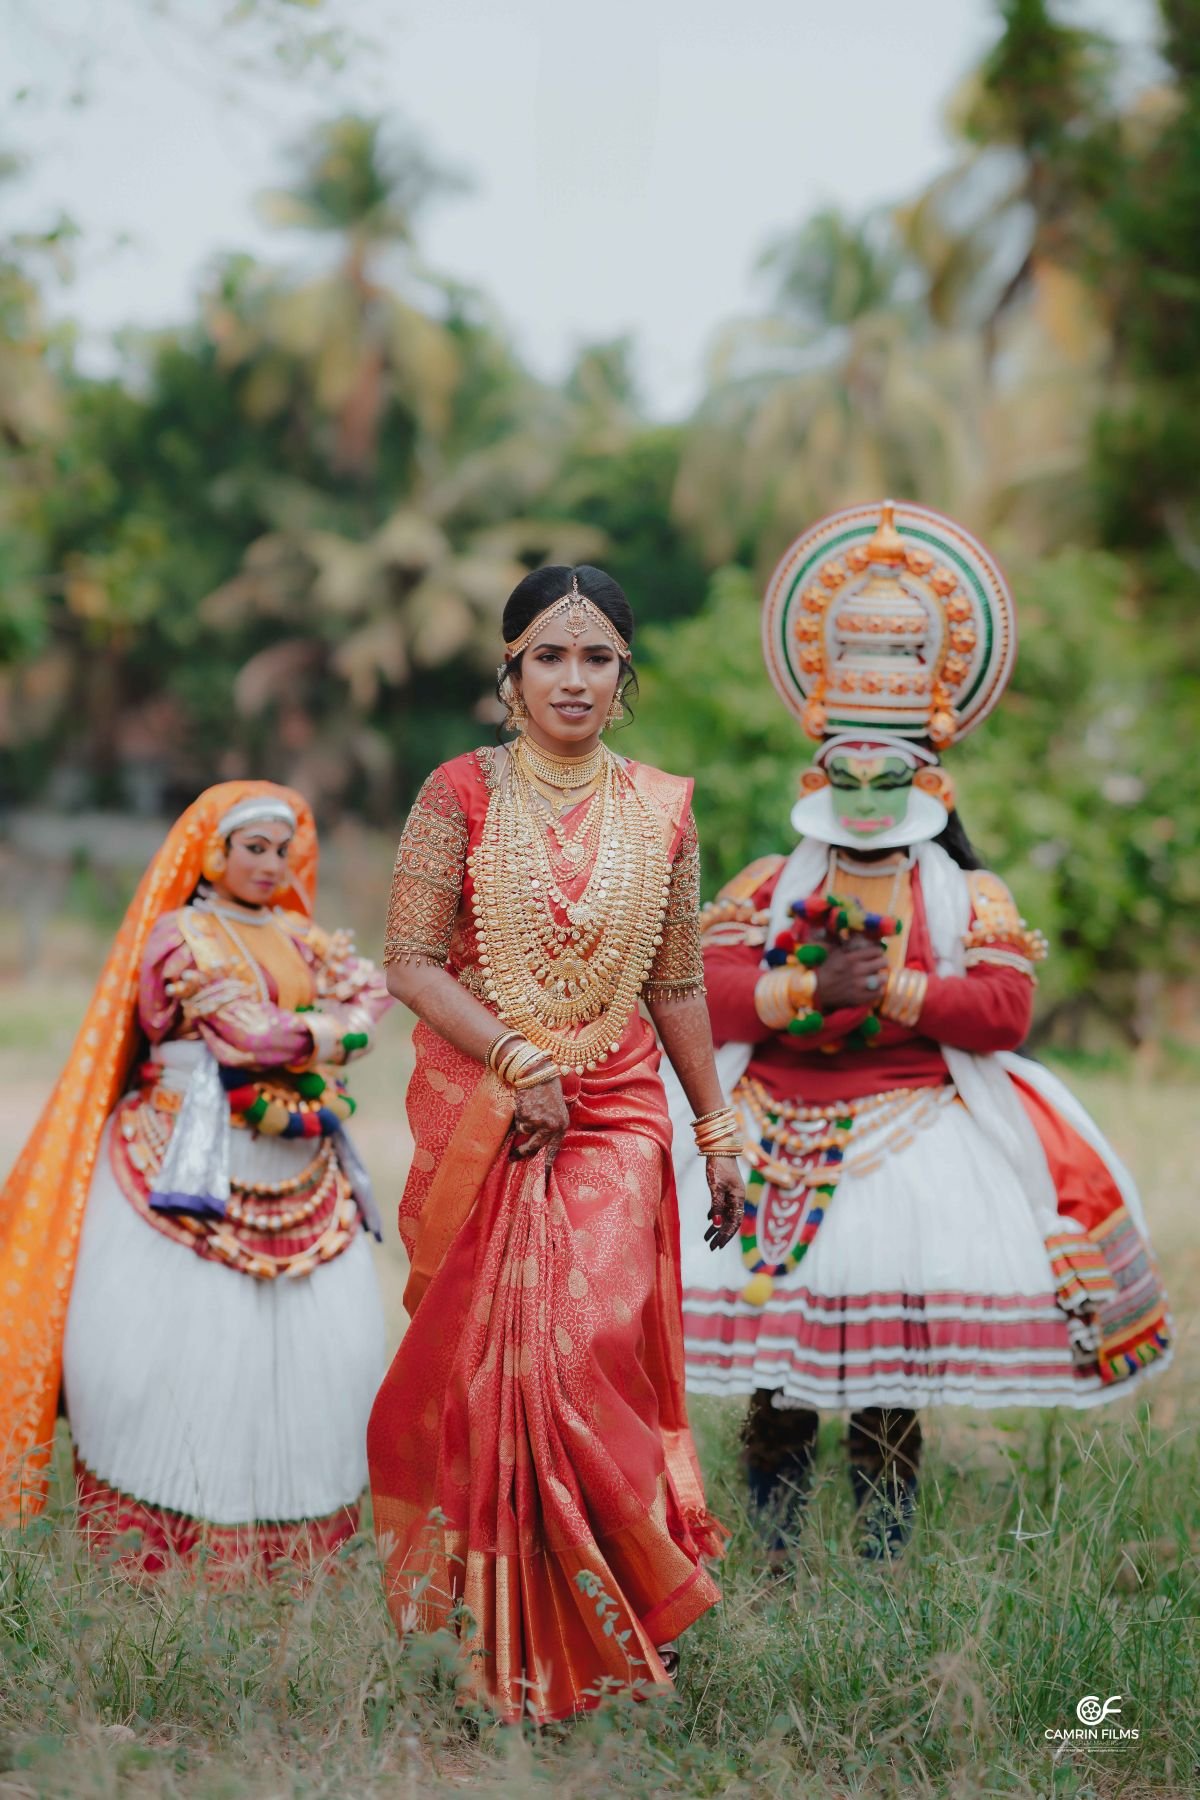 Commence Your Journey Of Love With A Spectacular Hindu Wedding.